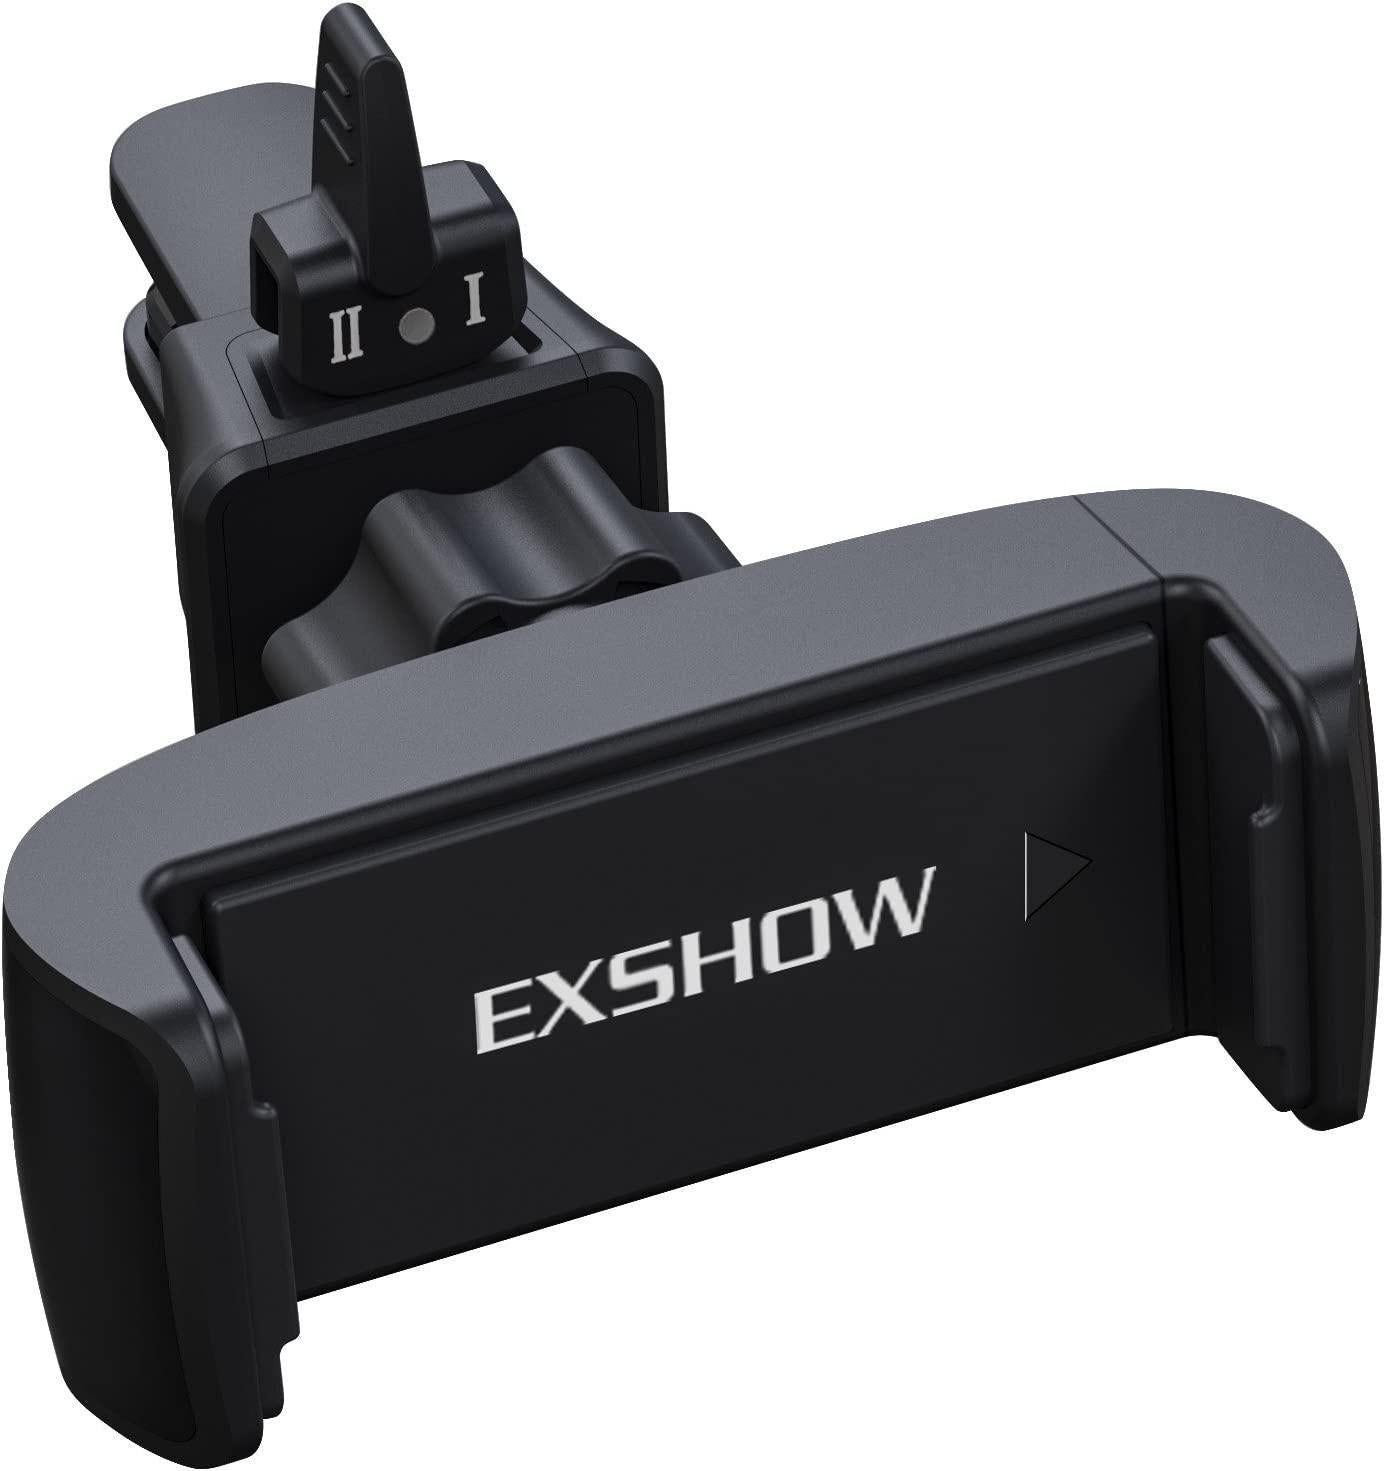 EXSHOW, EXSHOW Car Vent Phone Mount with 360 Degree Rotation for iPhone XR XS 8 8 Plus 7 7Plus 6 6Plus 5S 5C SE,Samsung Glaxy and more